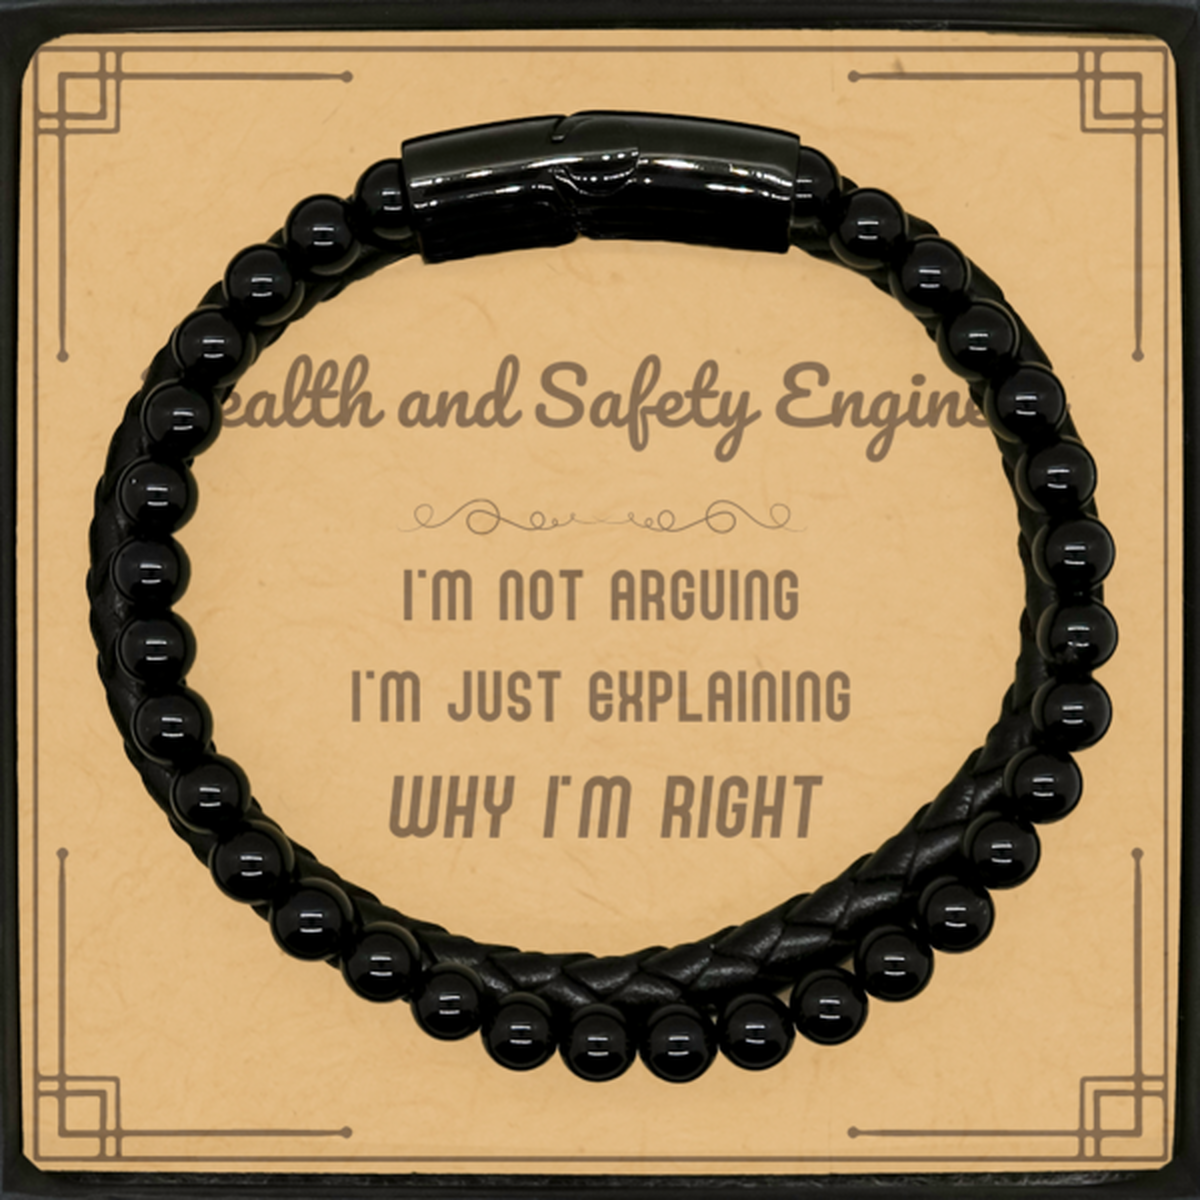 Health and Safety Engineer I'm not Arguing. I'm Just Explaining Why I'm RIGHT Stone Leather Bracelets, Funny Saying Quote Health and Safety Engineer Gifts For Health and Safety Engineer Message Card Graduation Birthday Christmas Gifts for Men Women Cowork